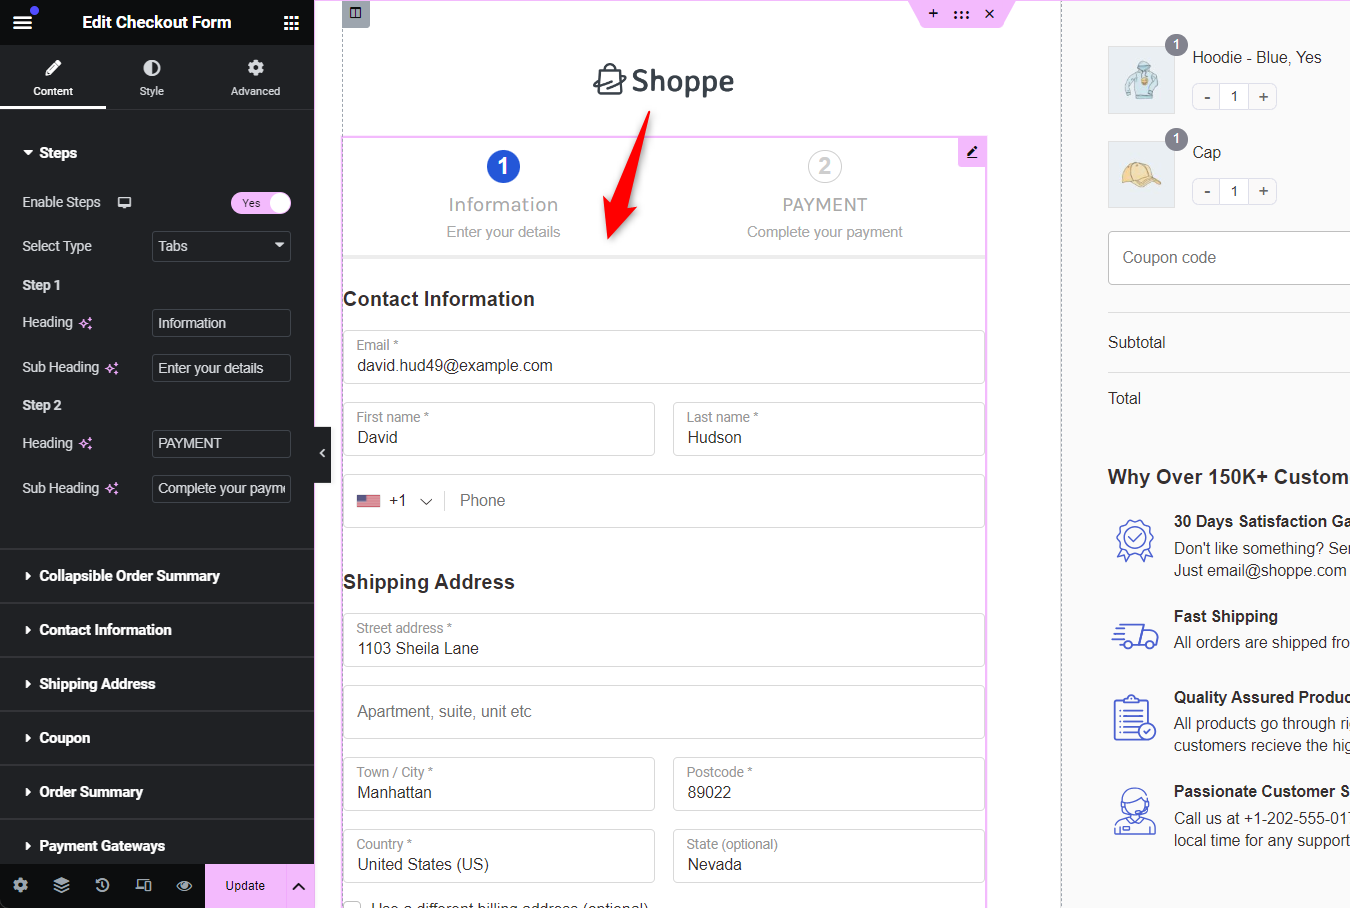 Use elementor widgets to transform the look of your checkout form and page without using woocommerce checkout hooks